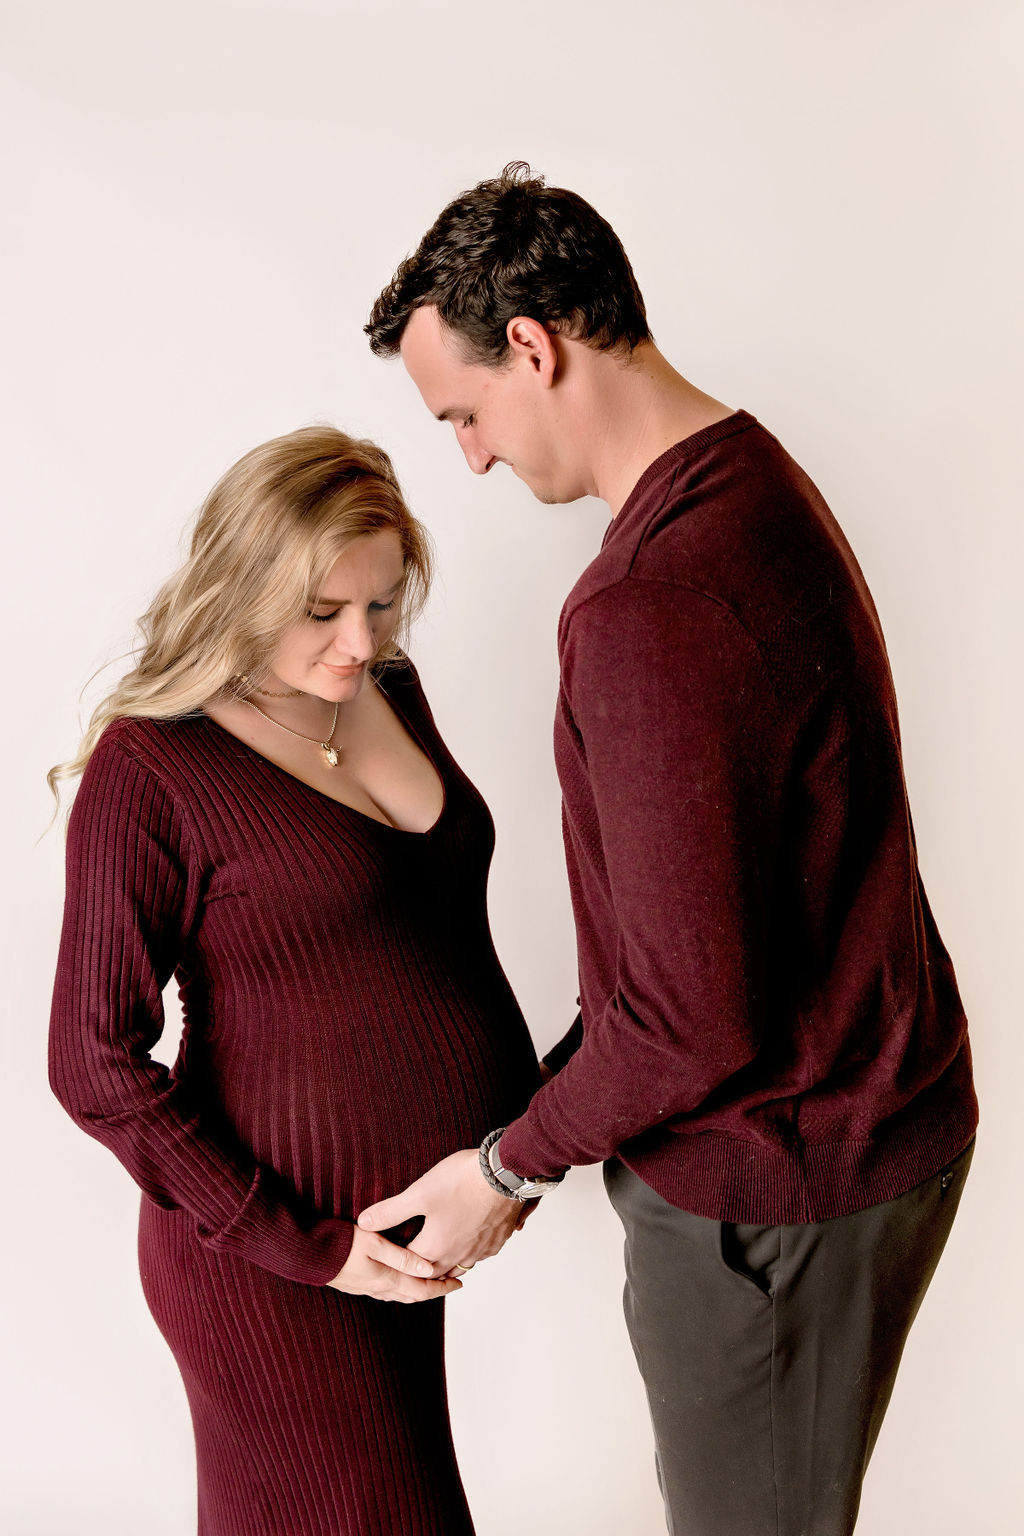 pregnant woman and her partner dressed in matching maroon outfits looking at her baby bump